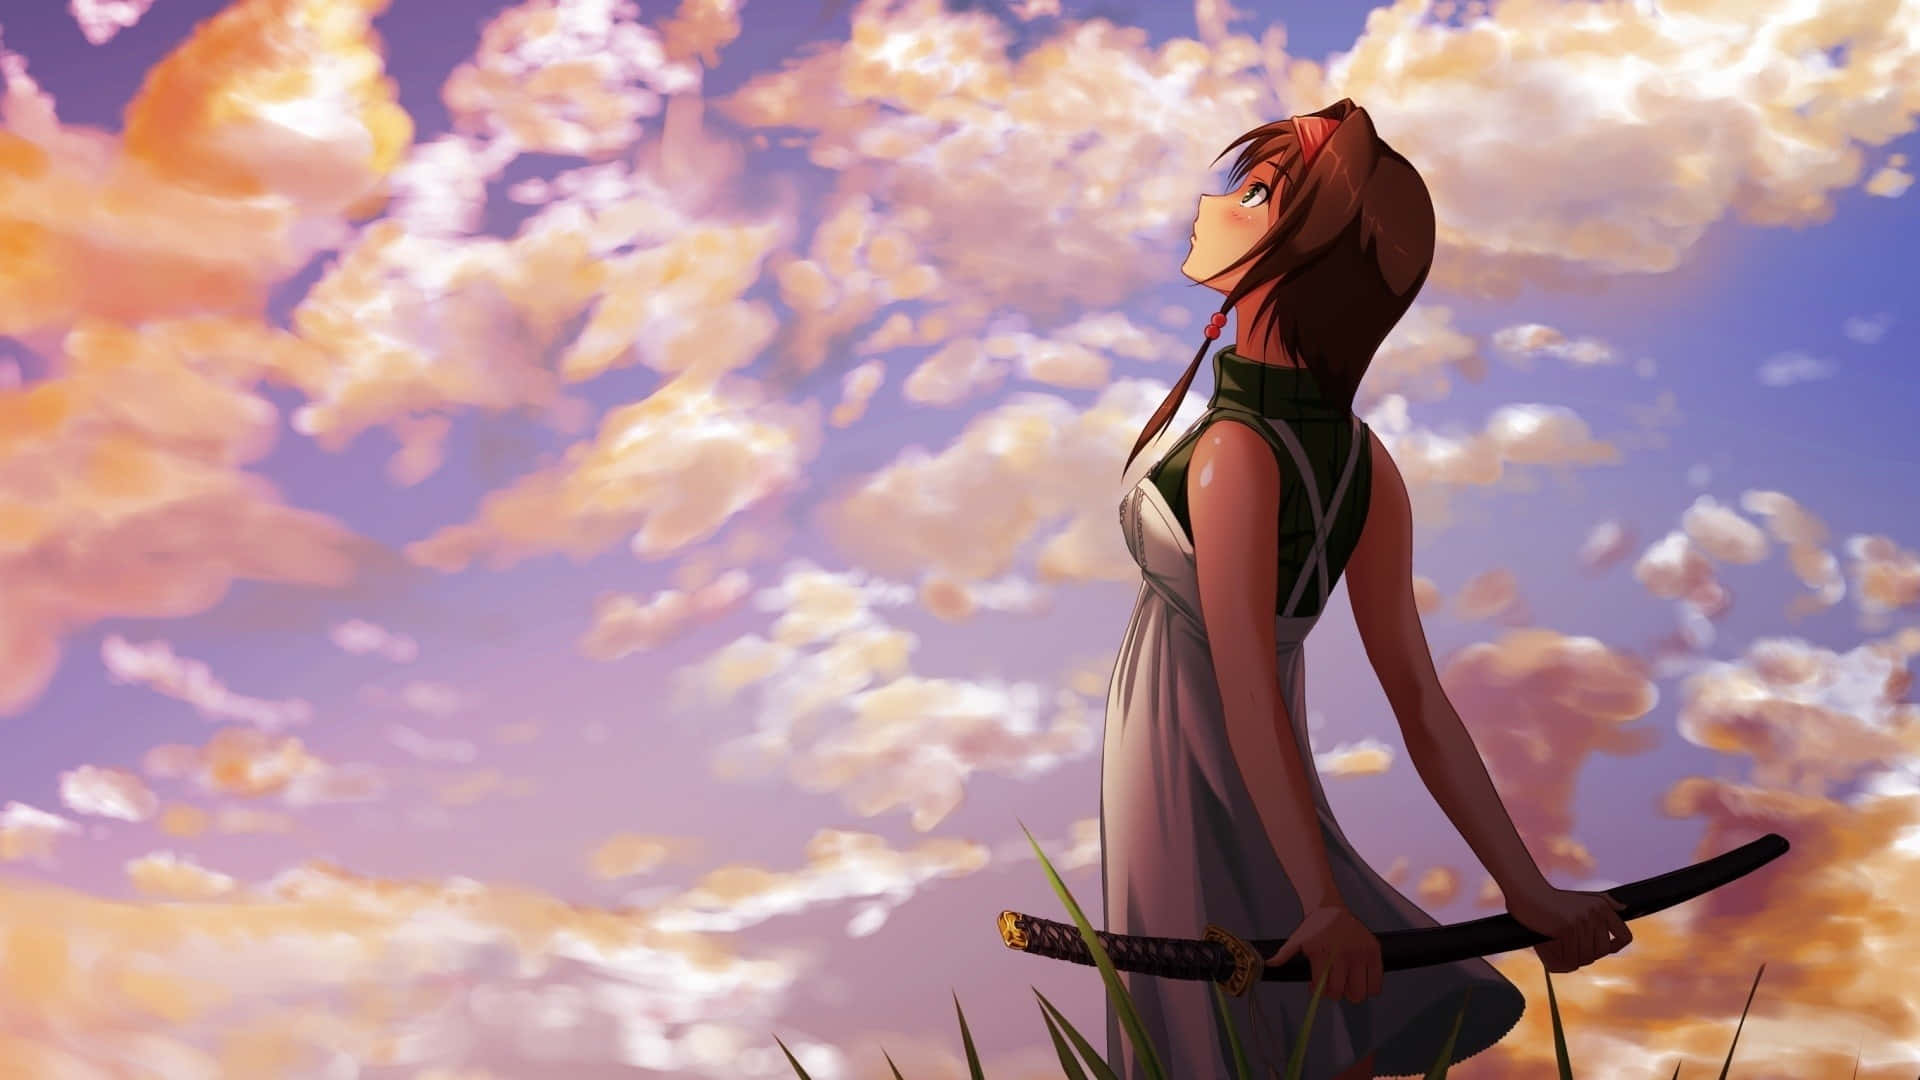 With a heavy heart, the anime character mourned the death of a loved one. Wallpaper